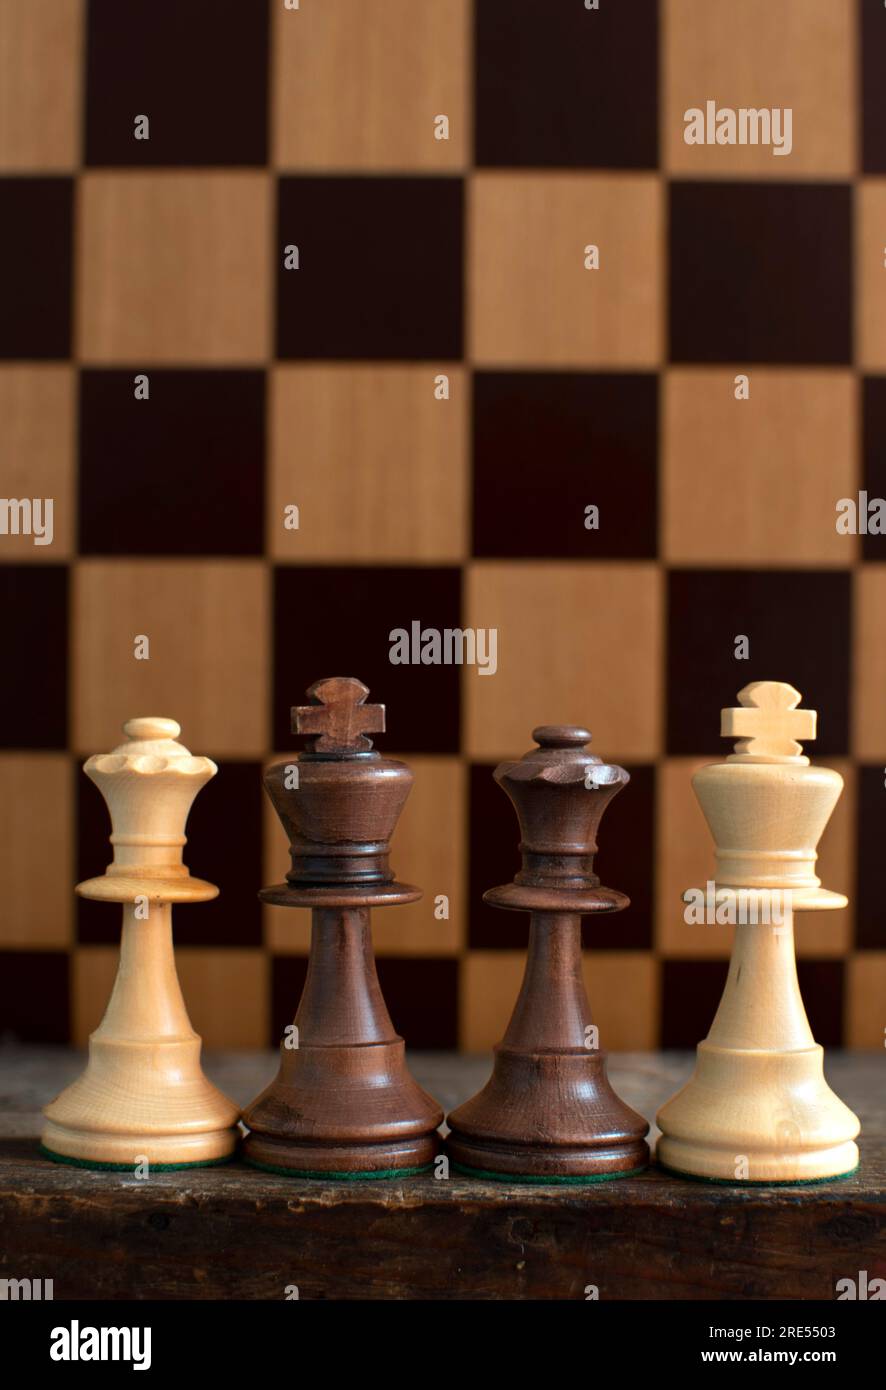 Queen and king, chess pieces and chessboard Stock Photo